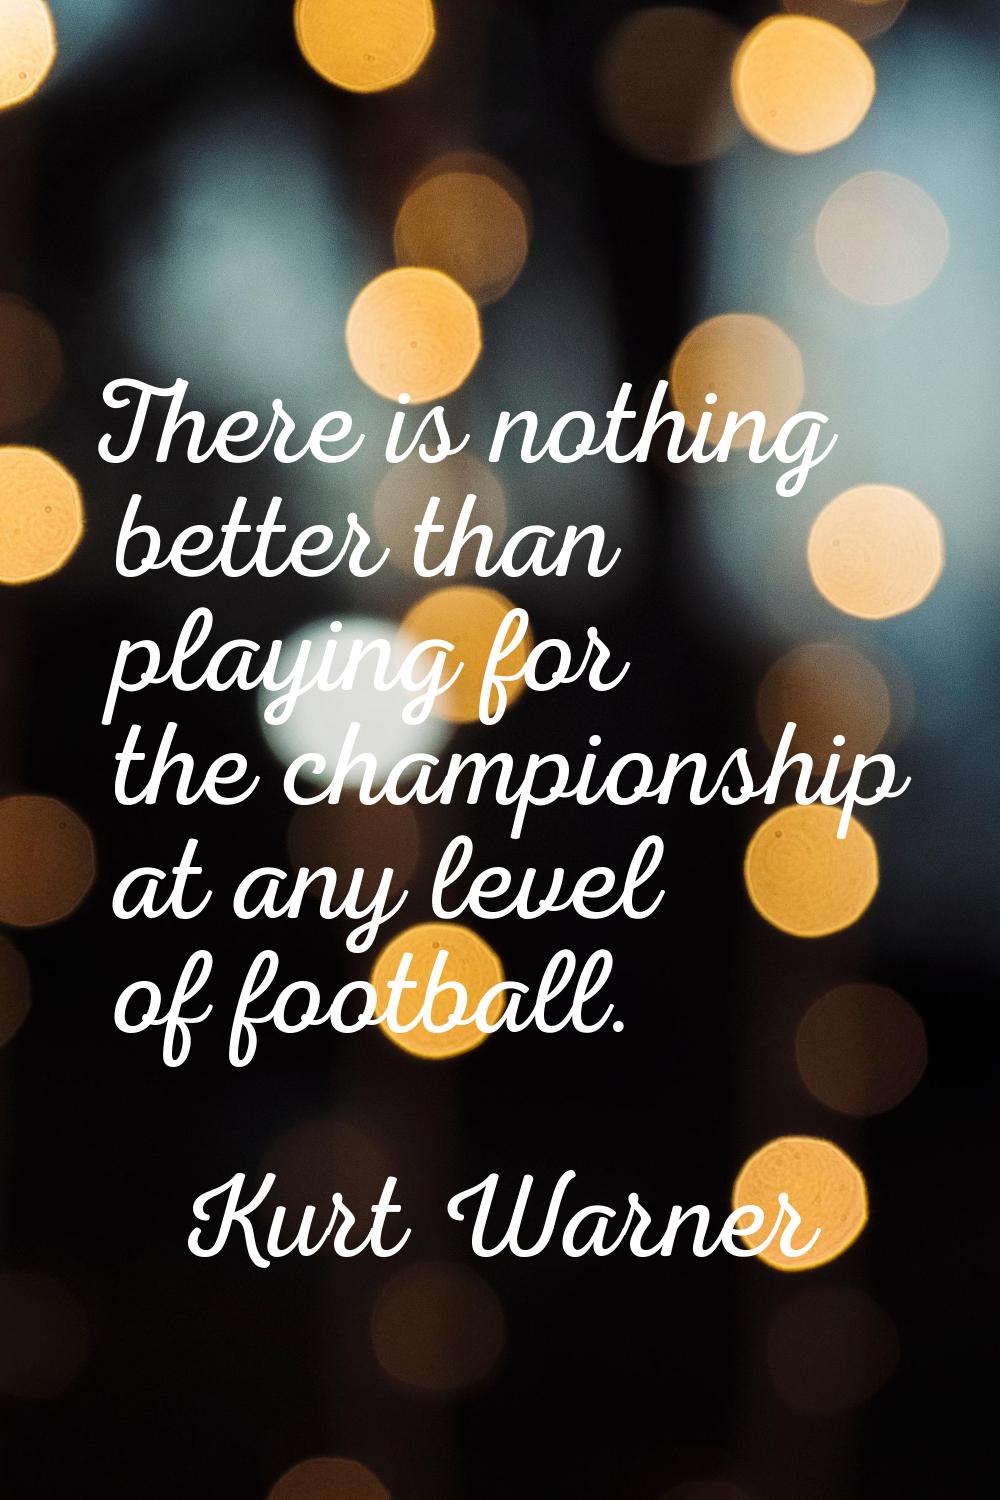 There is nothing better than playing for the championship at any level of football.